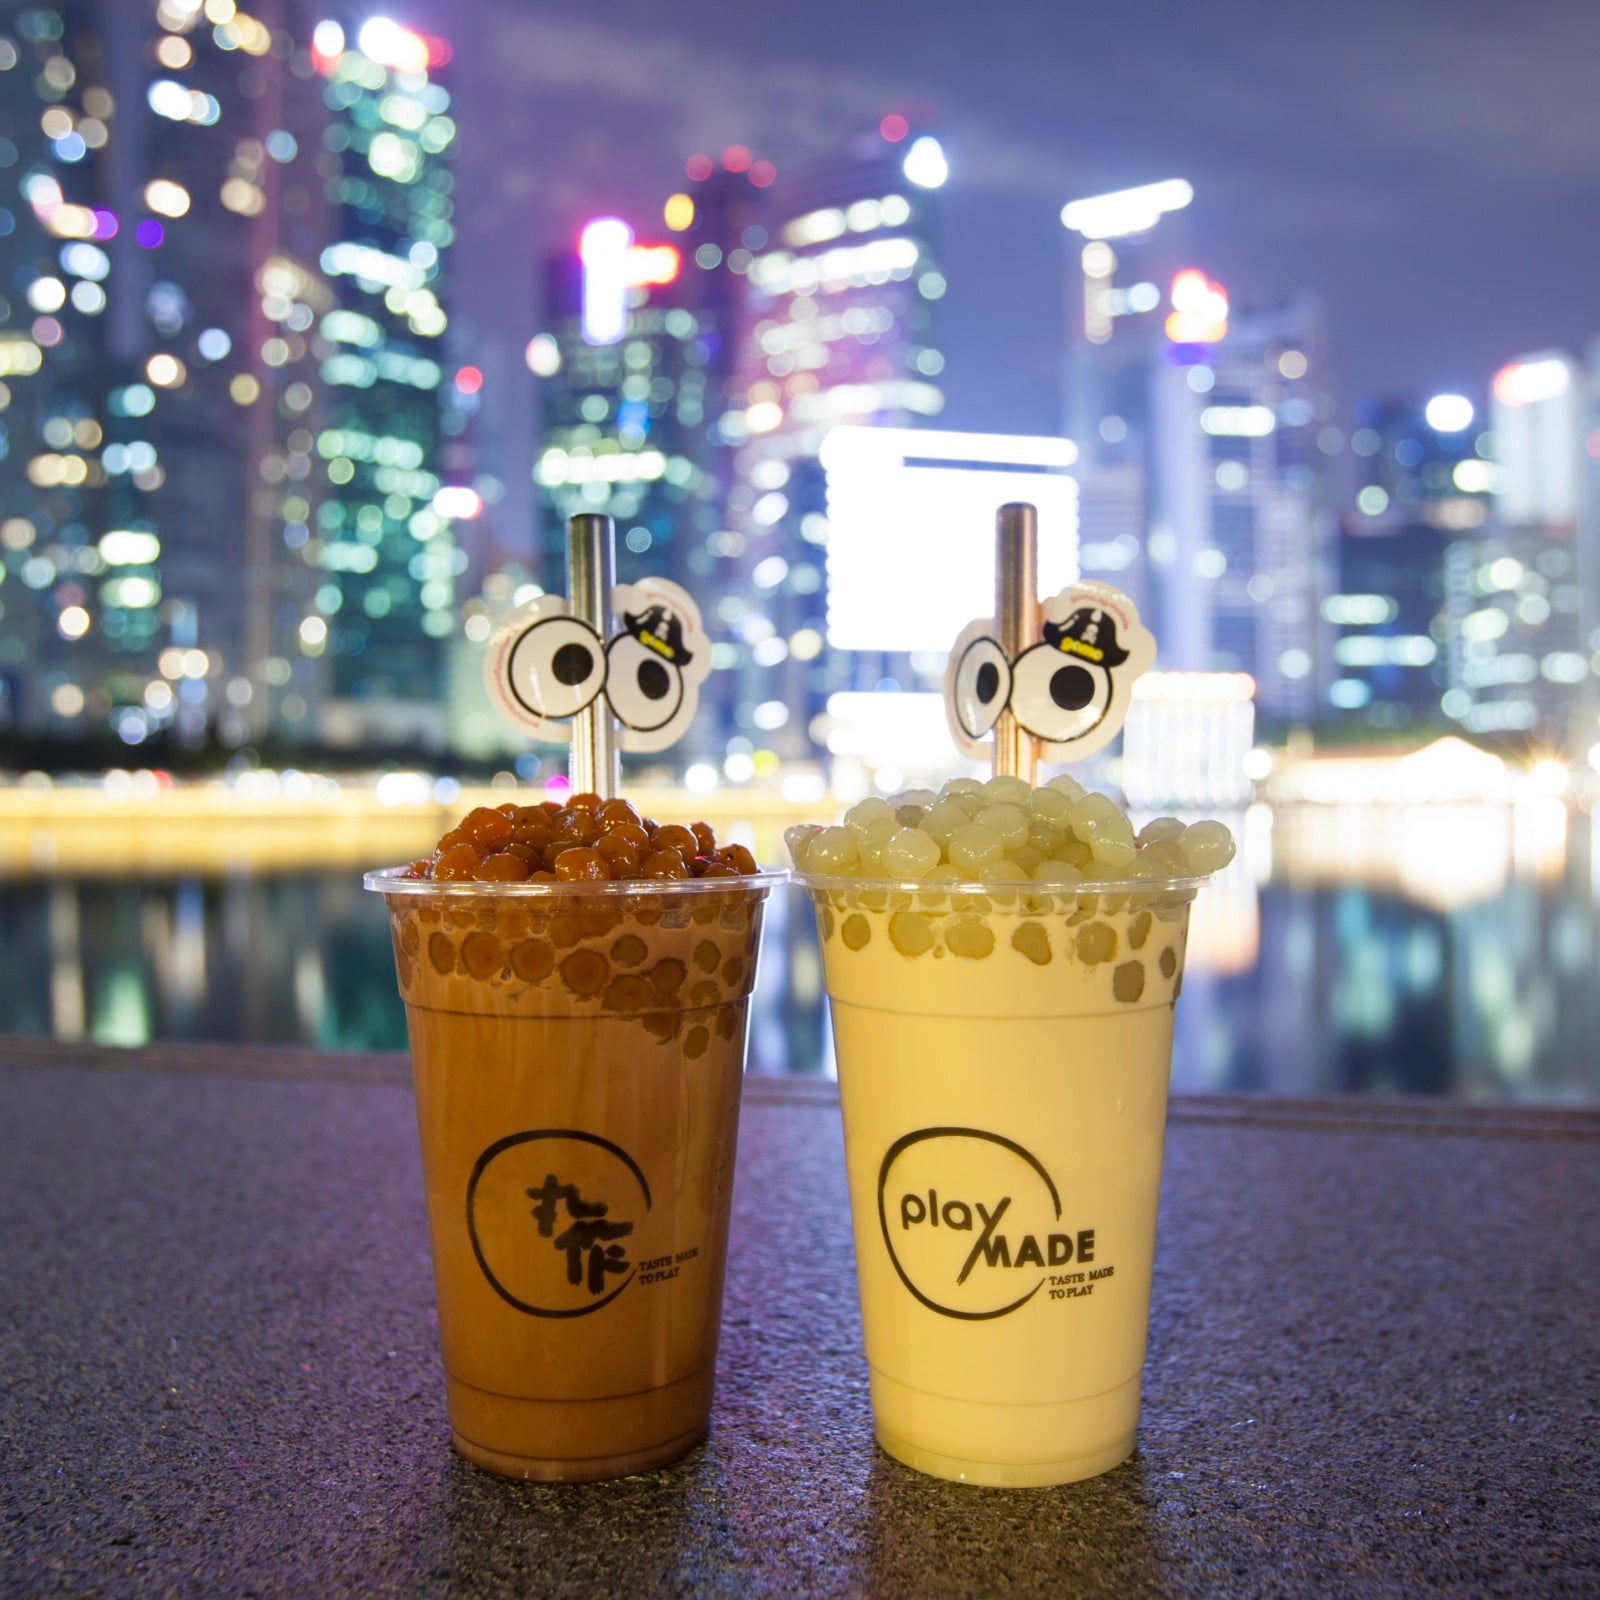 Wasabi Milk Tea with Wasabi Pearls & Mala Pearls Are Now Available & We Are Confused - WORLD OF BUZZ 2